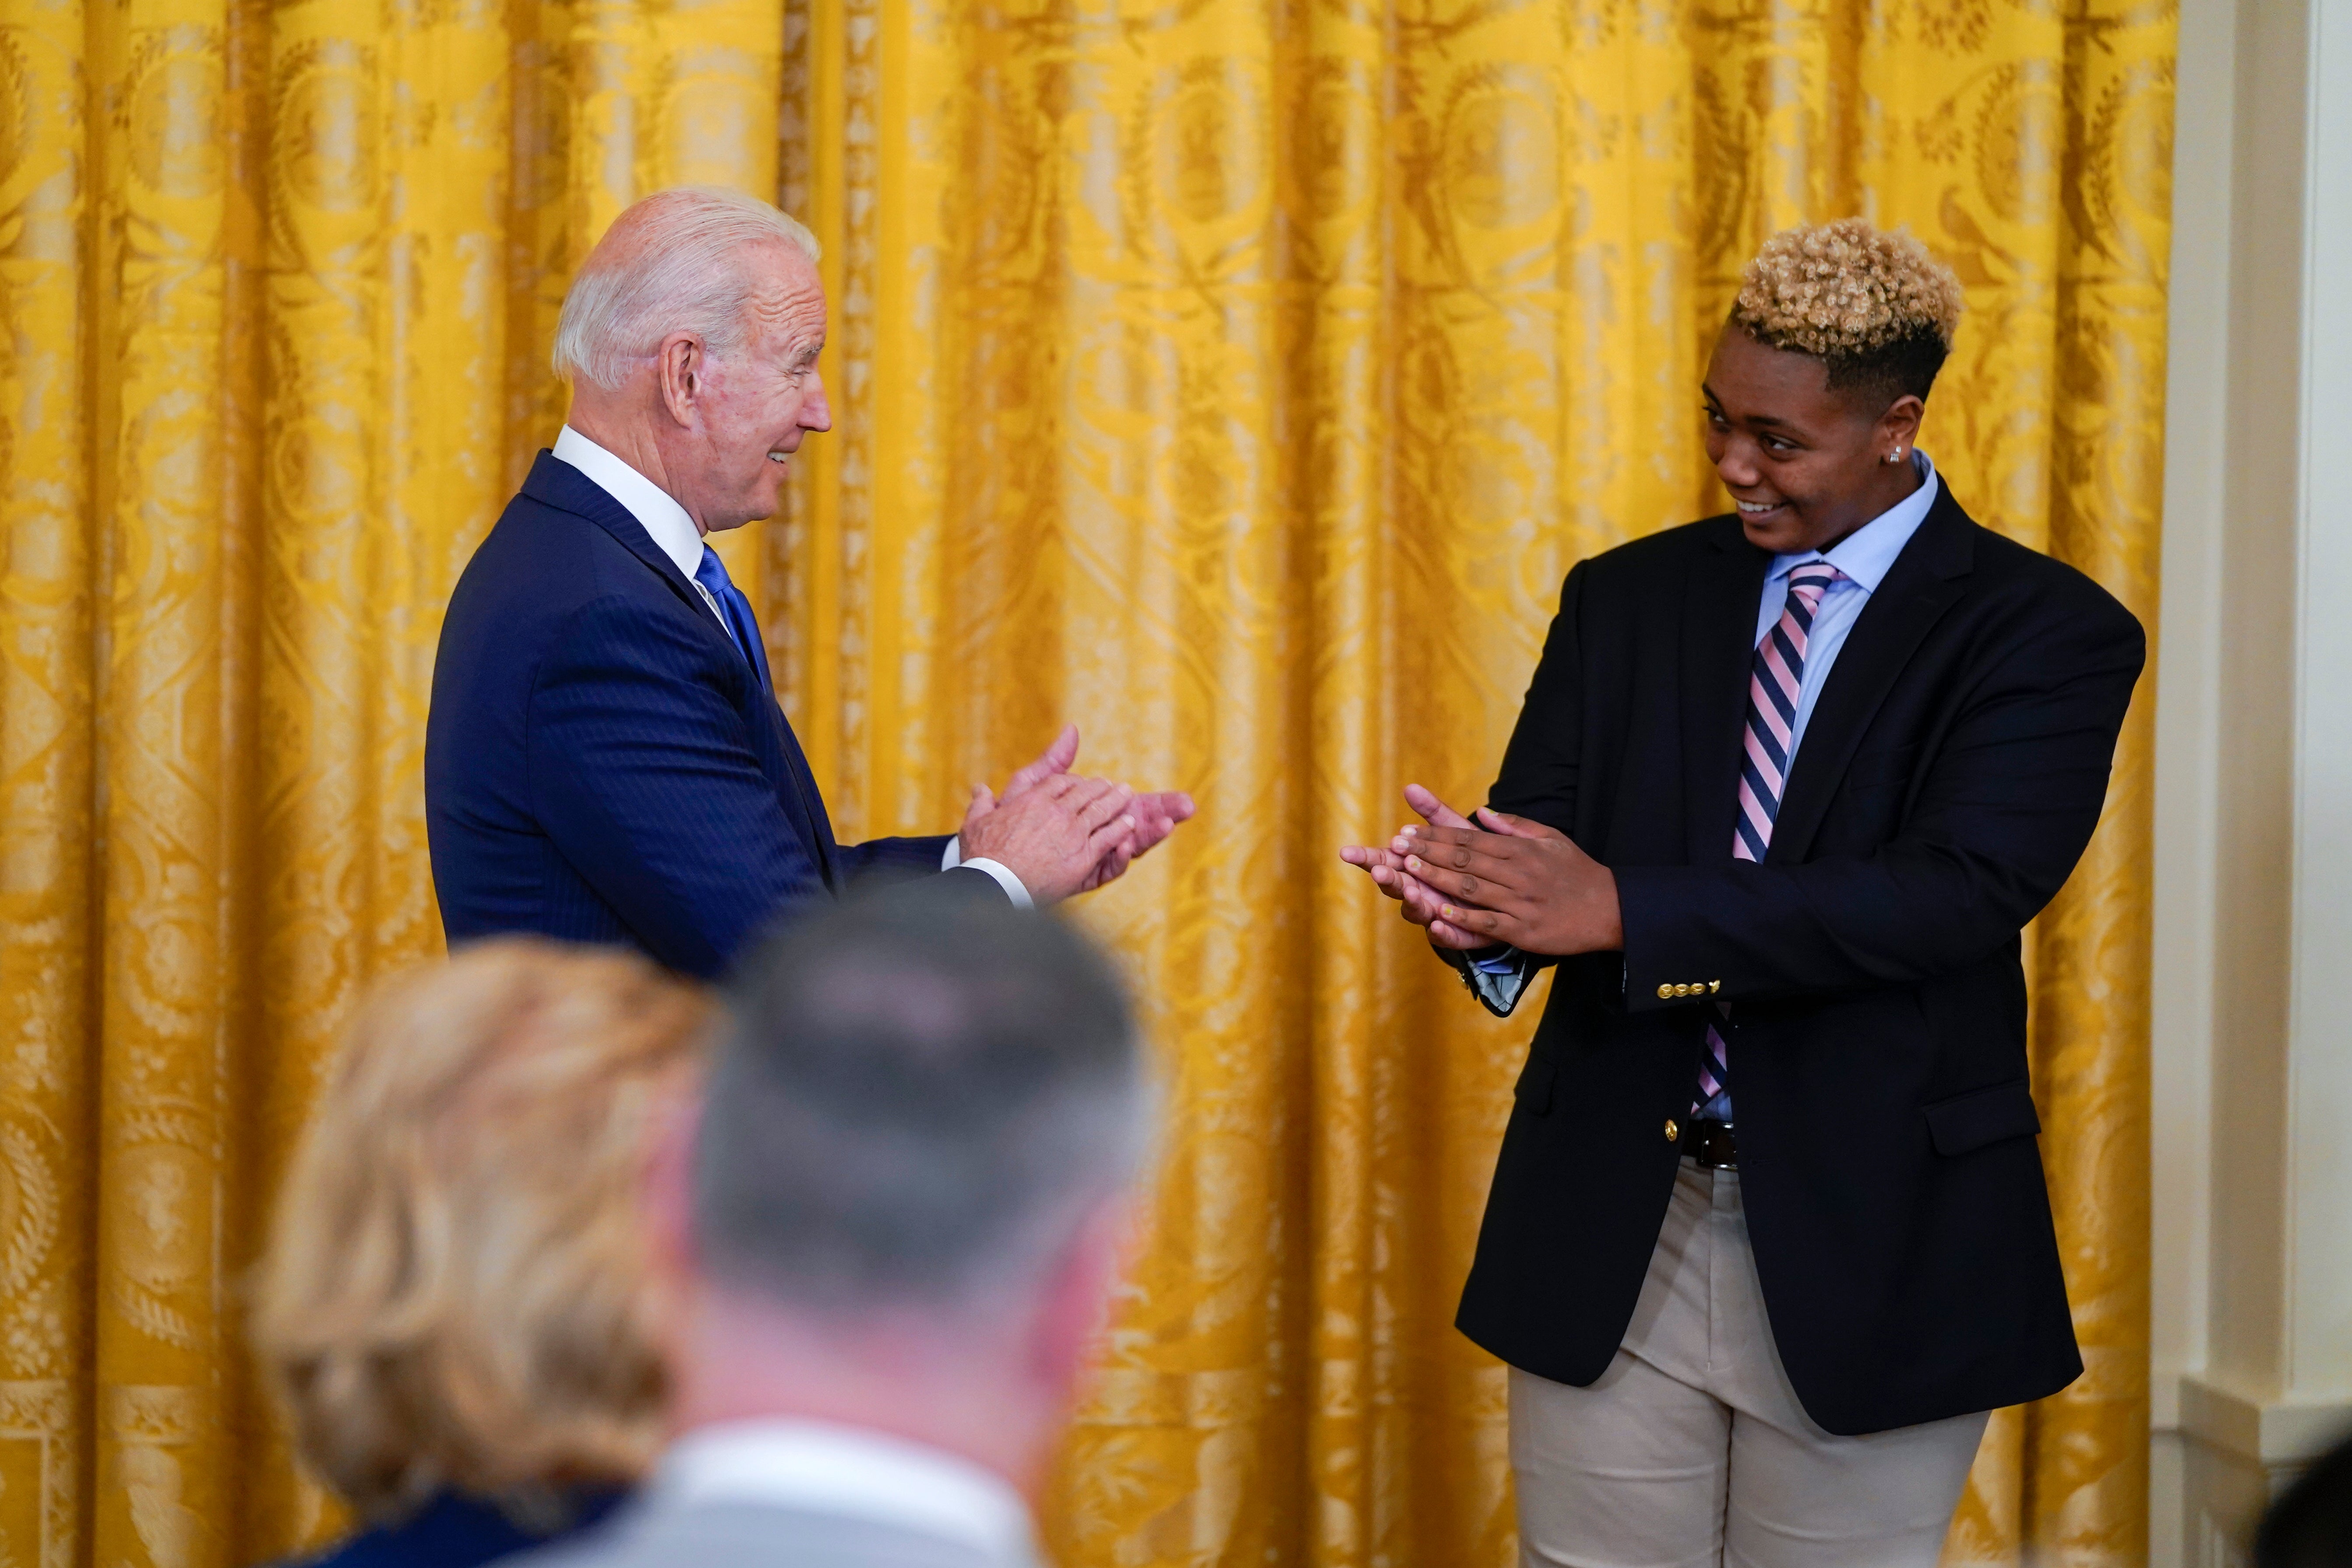 Joe Biden is introduced by 16-year-old Ashton Mota during a White House Pride event.